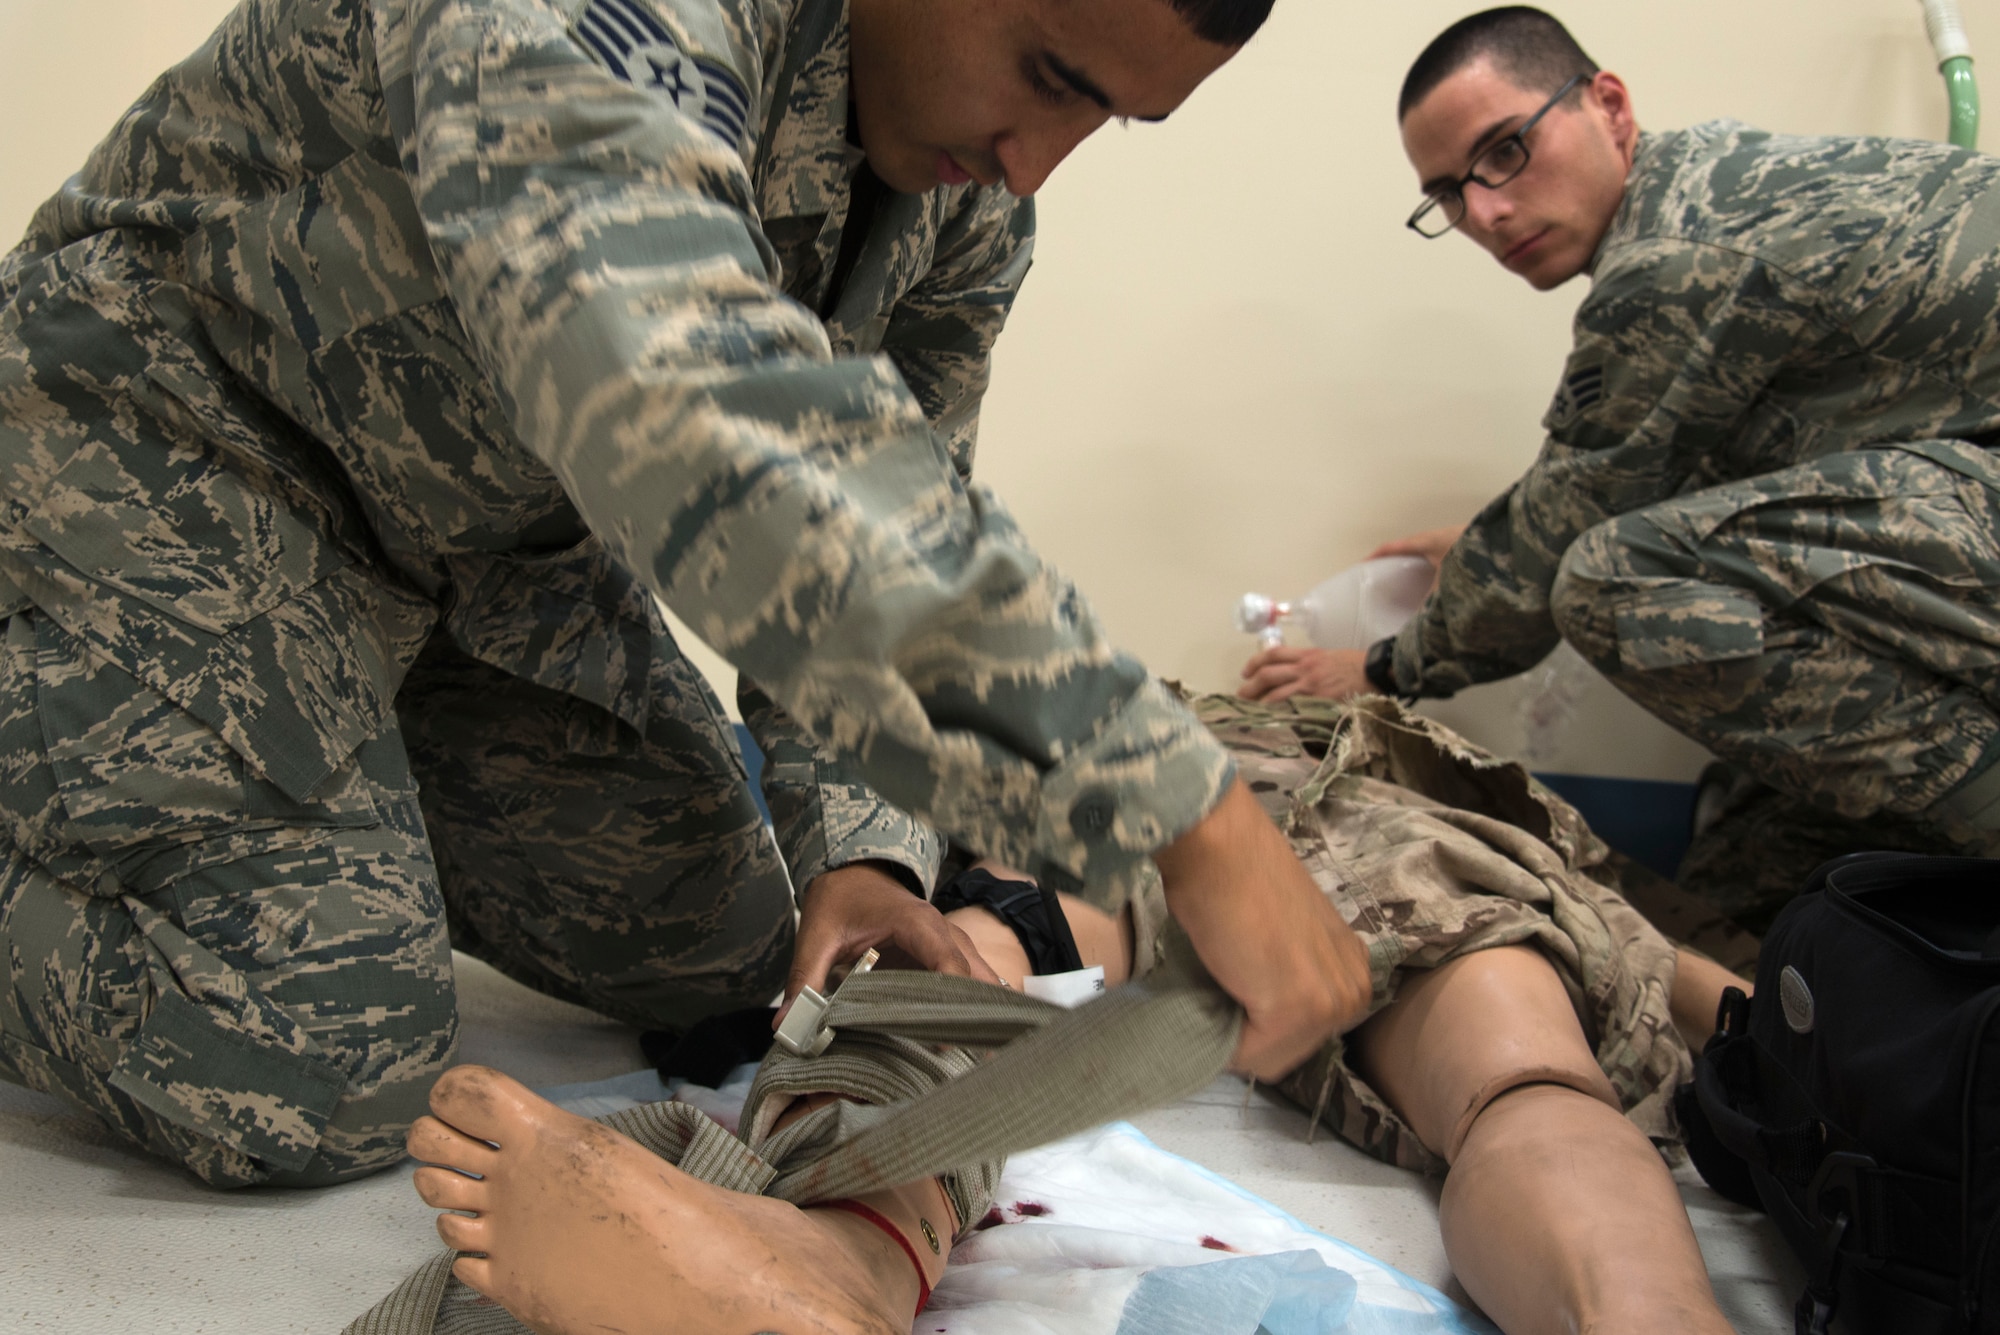 Senior Airman Chris Funn, 375th Medical Operations Squadron aerospace medical technician, performs assisted ventilation while Staff Sgt. Orlando Navarro, also an aerospace medical technician with the 375th MOS, applies a pressure bandage to a simulated blast patient while training for the Emergency Medical Technician Rodeo.(U.S.Air Force Photo by Airman Daniel Garcia)